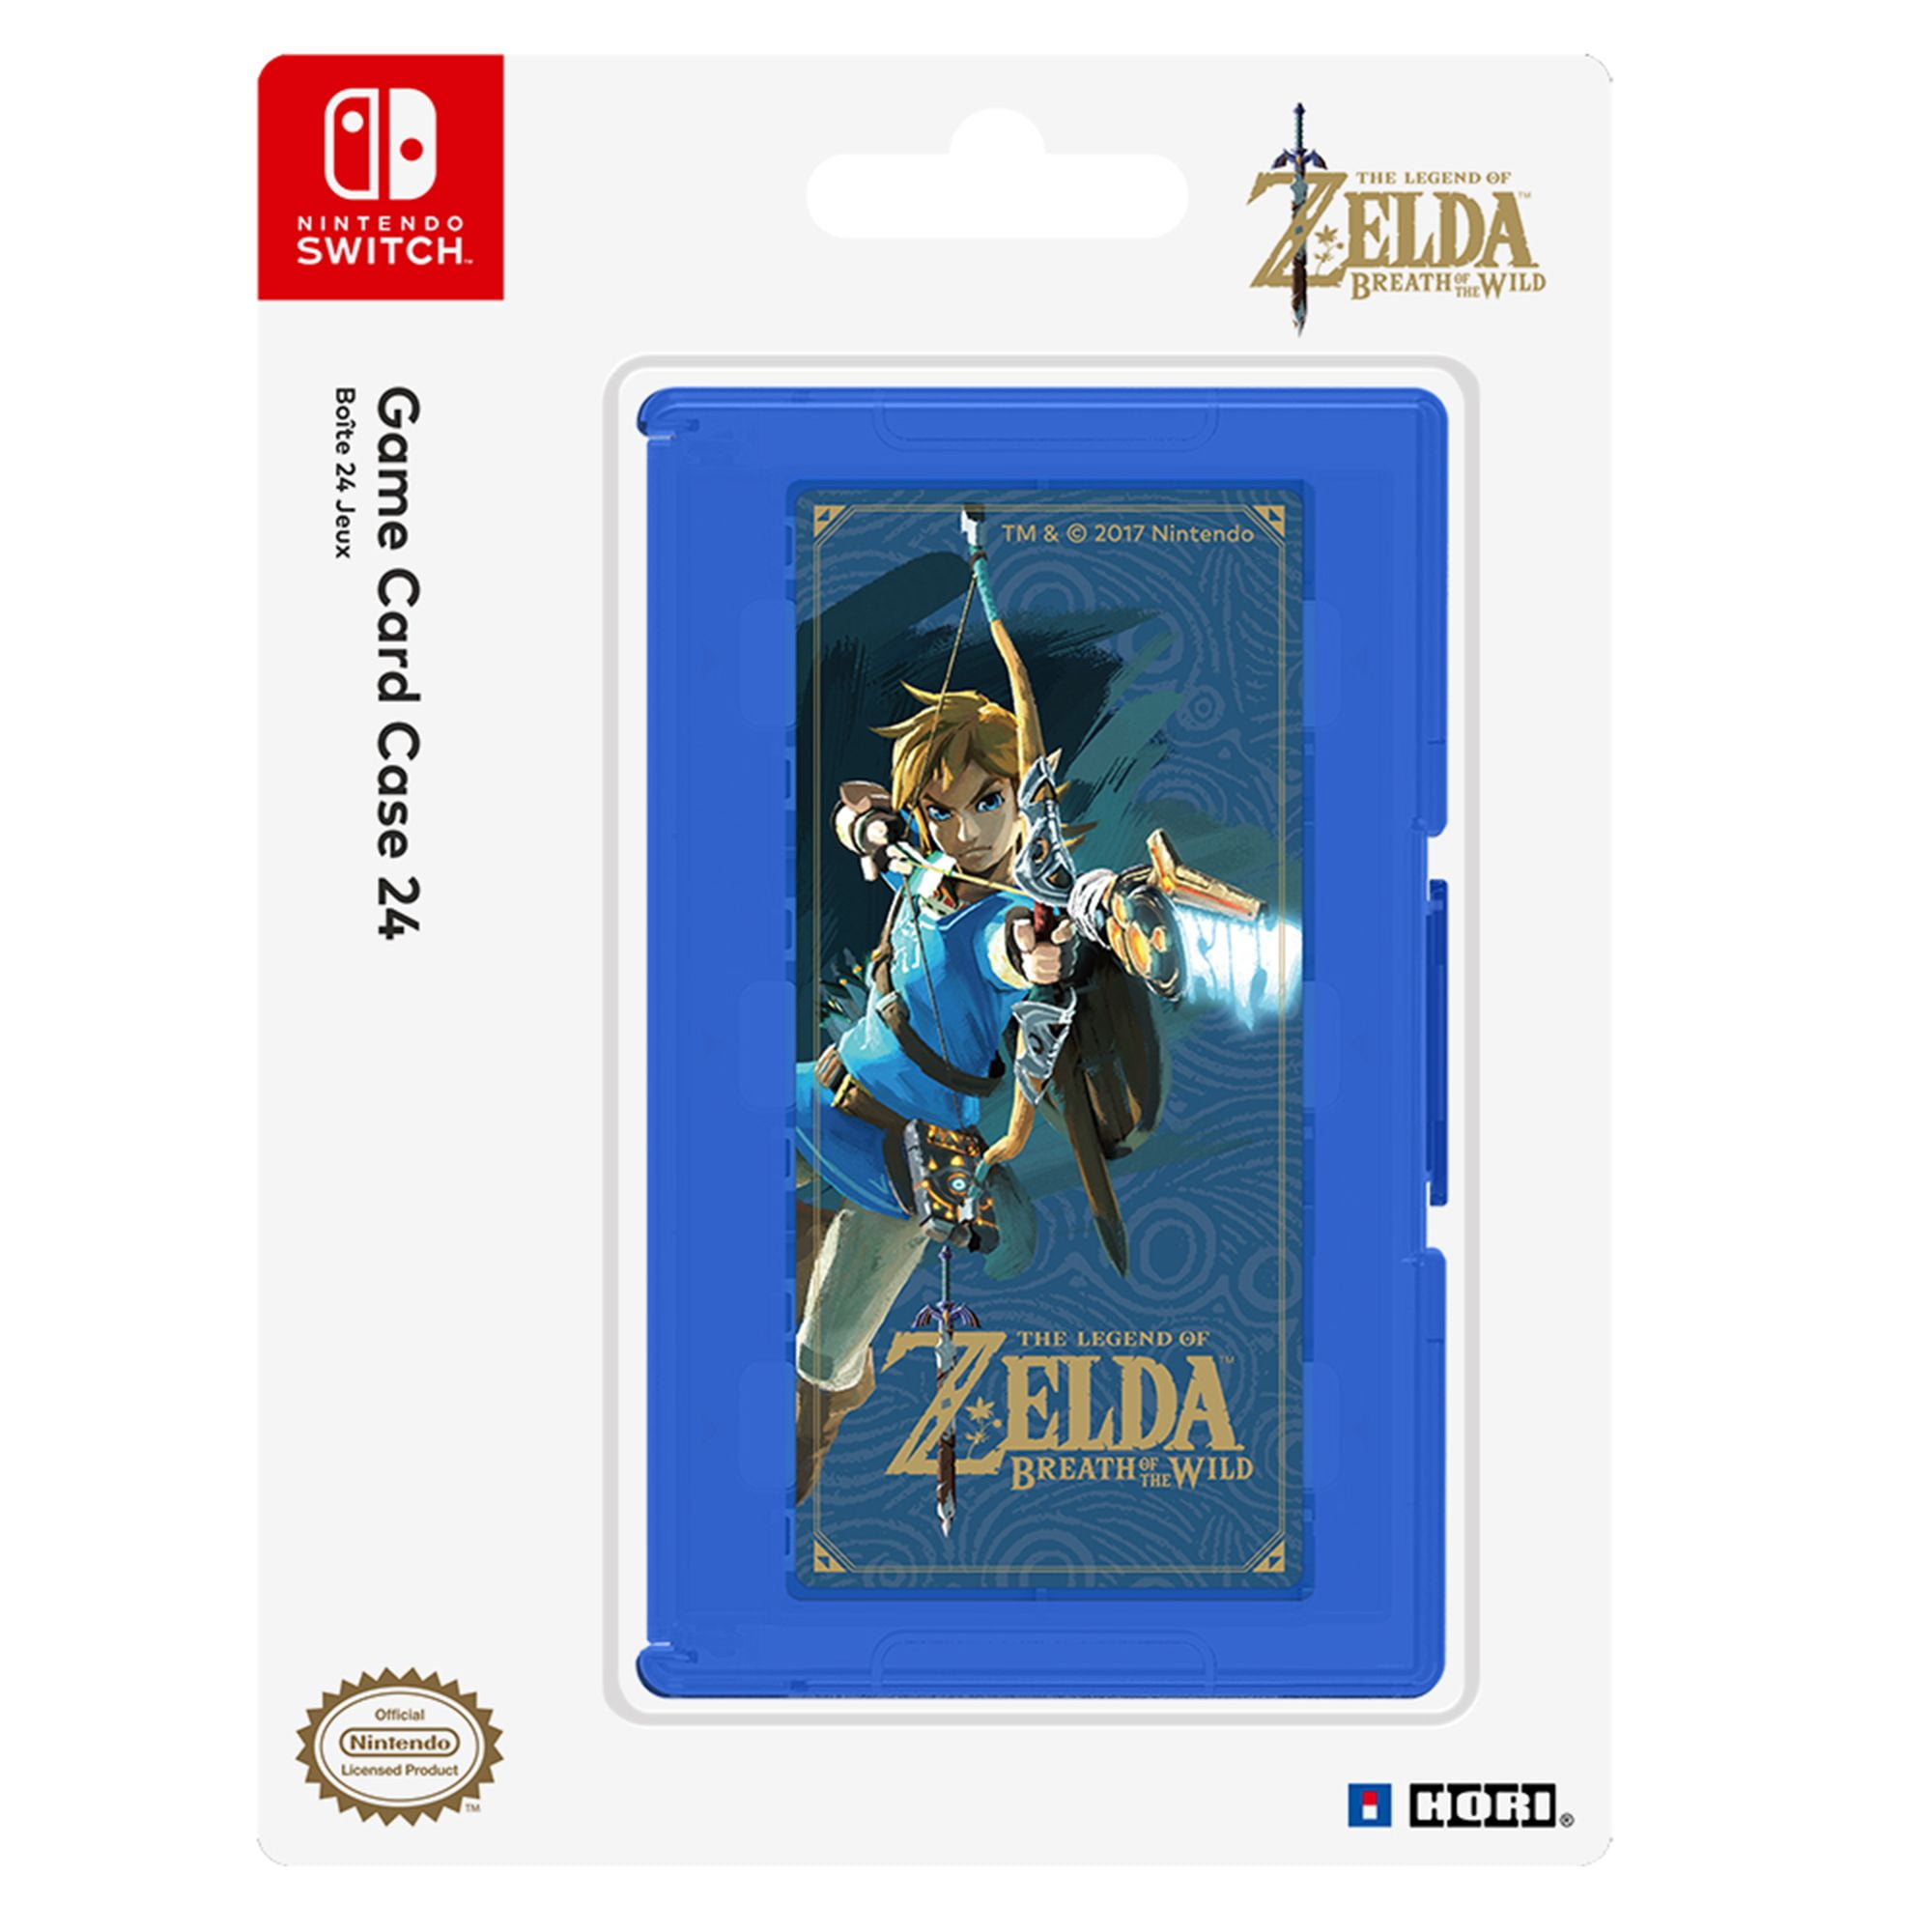 Hori Game Case Protective Cover Zelda Breath of the Wild Edition for Nintendo Switch - Walmart.com